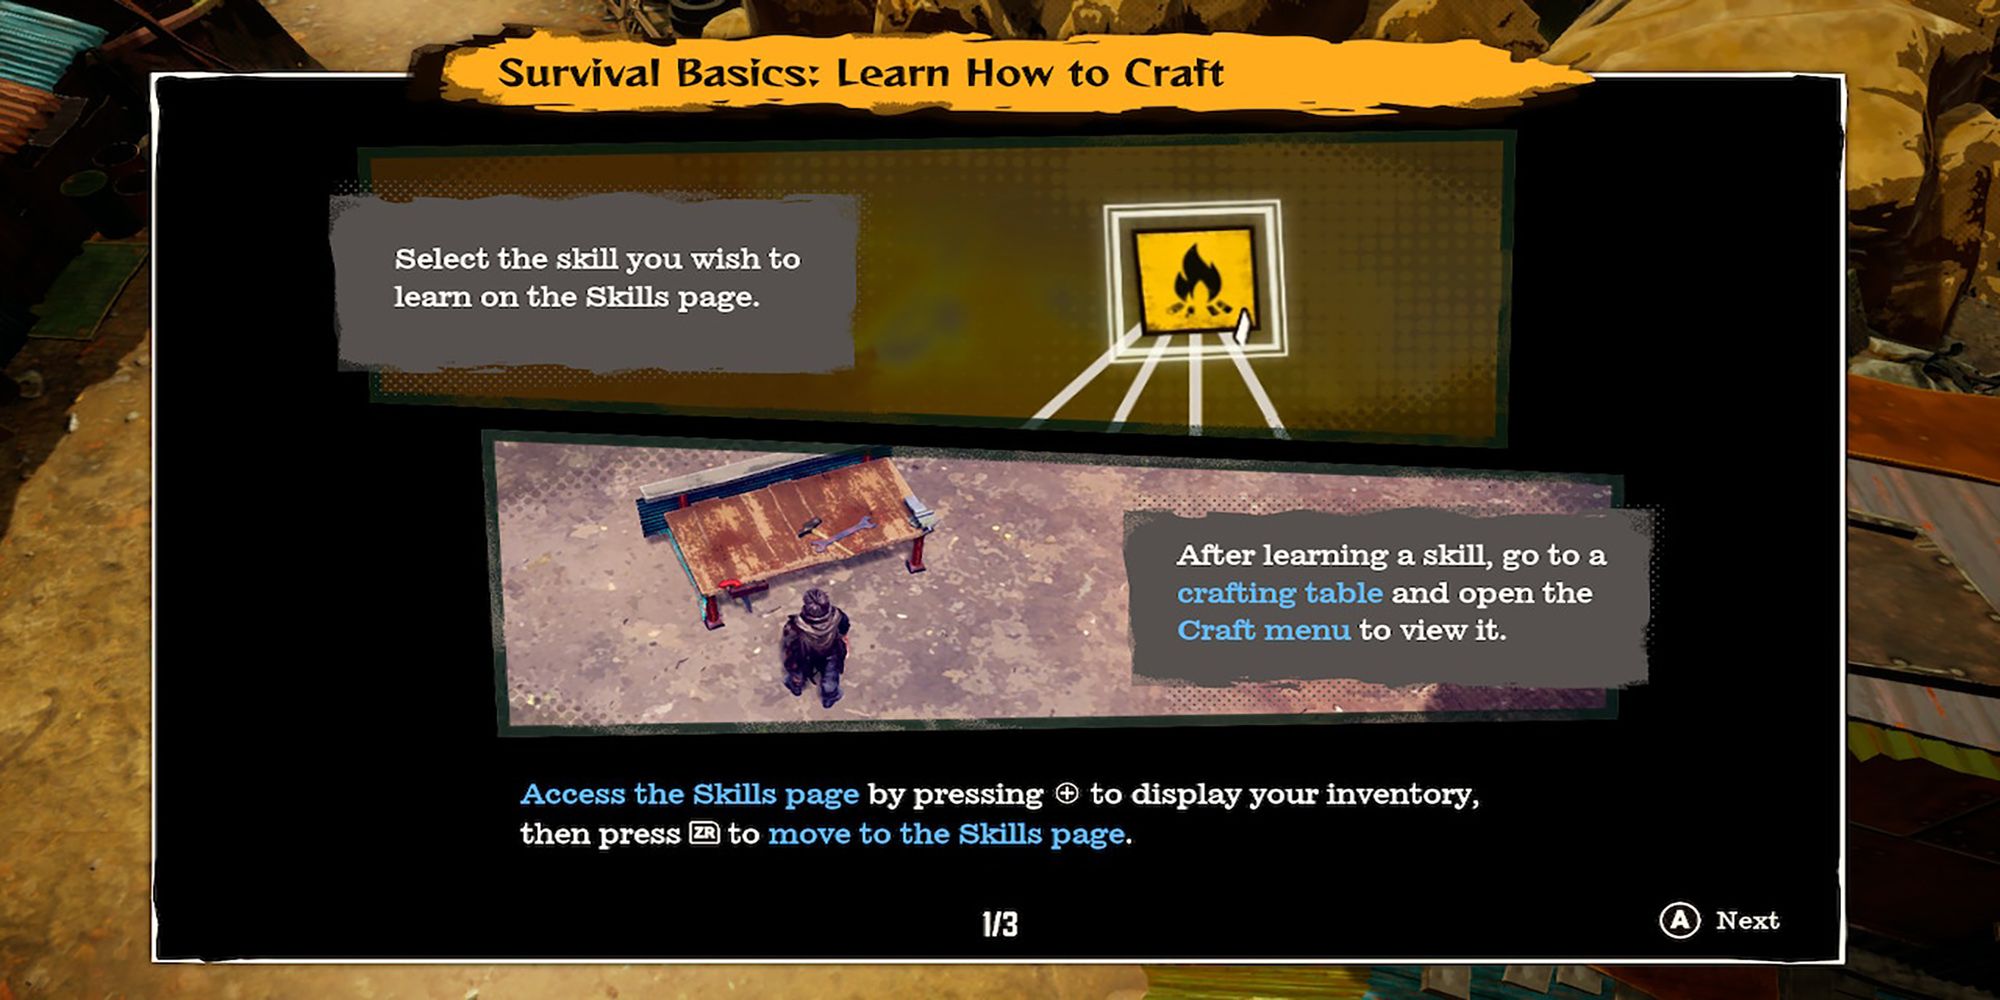 The Learn How To Craft tutorial teaches players how to learn crafting skills and put them to use at the crafting table in Deadcraft.